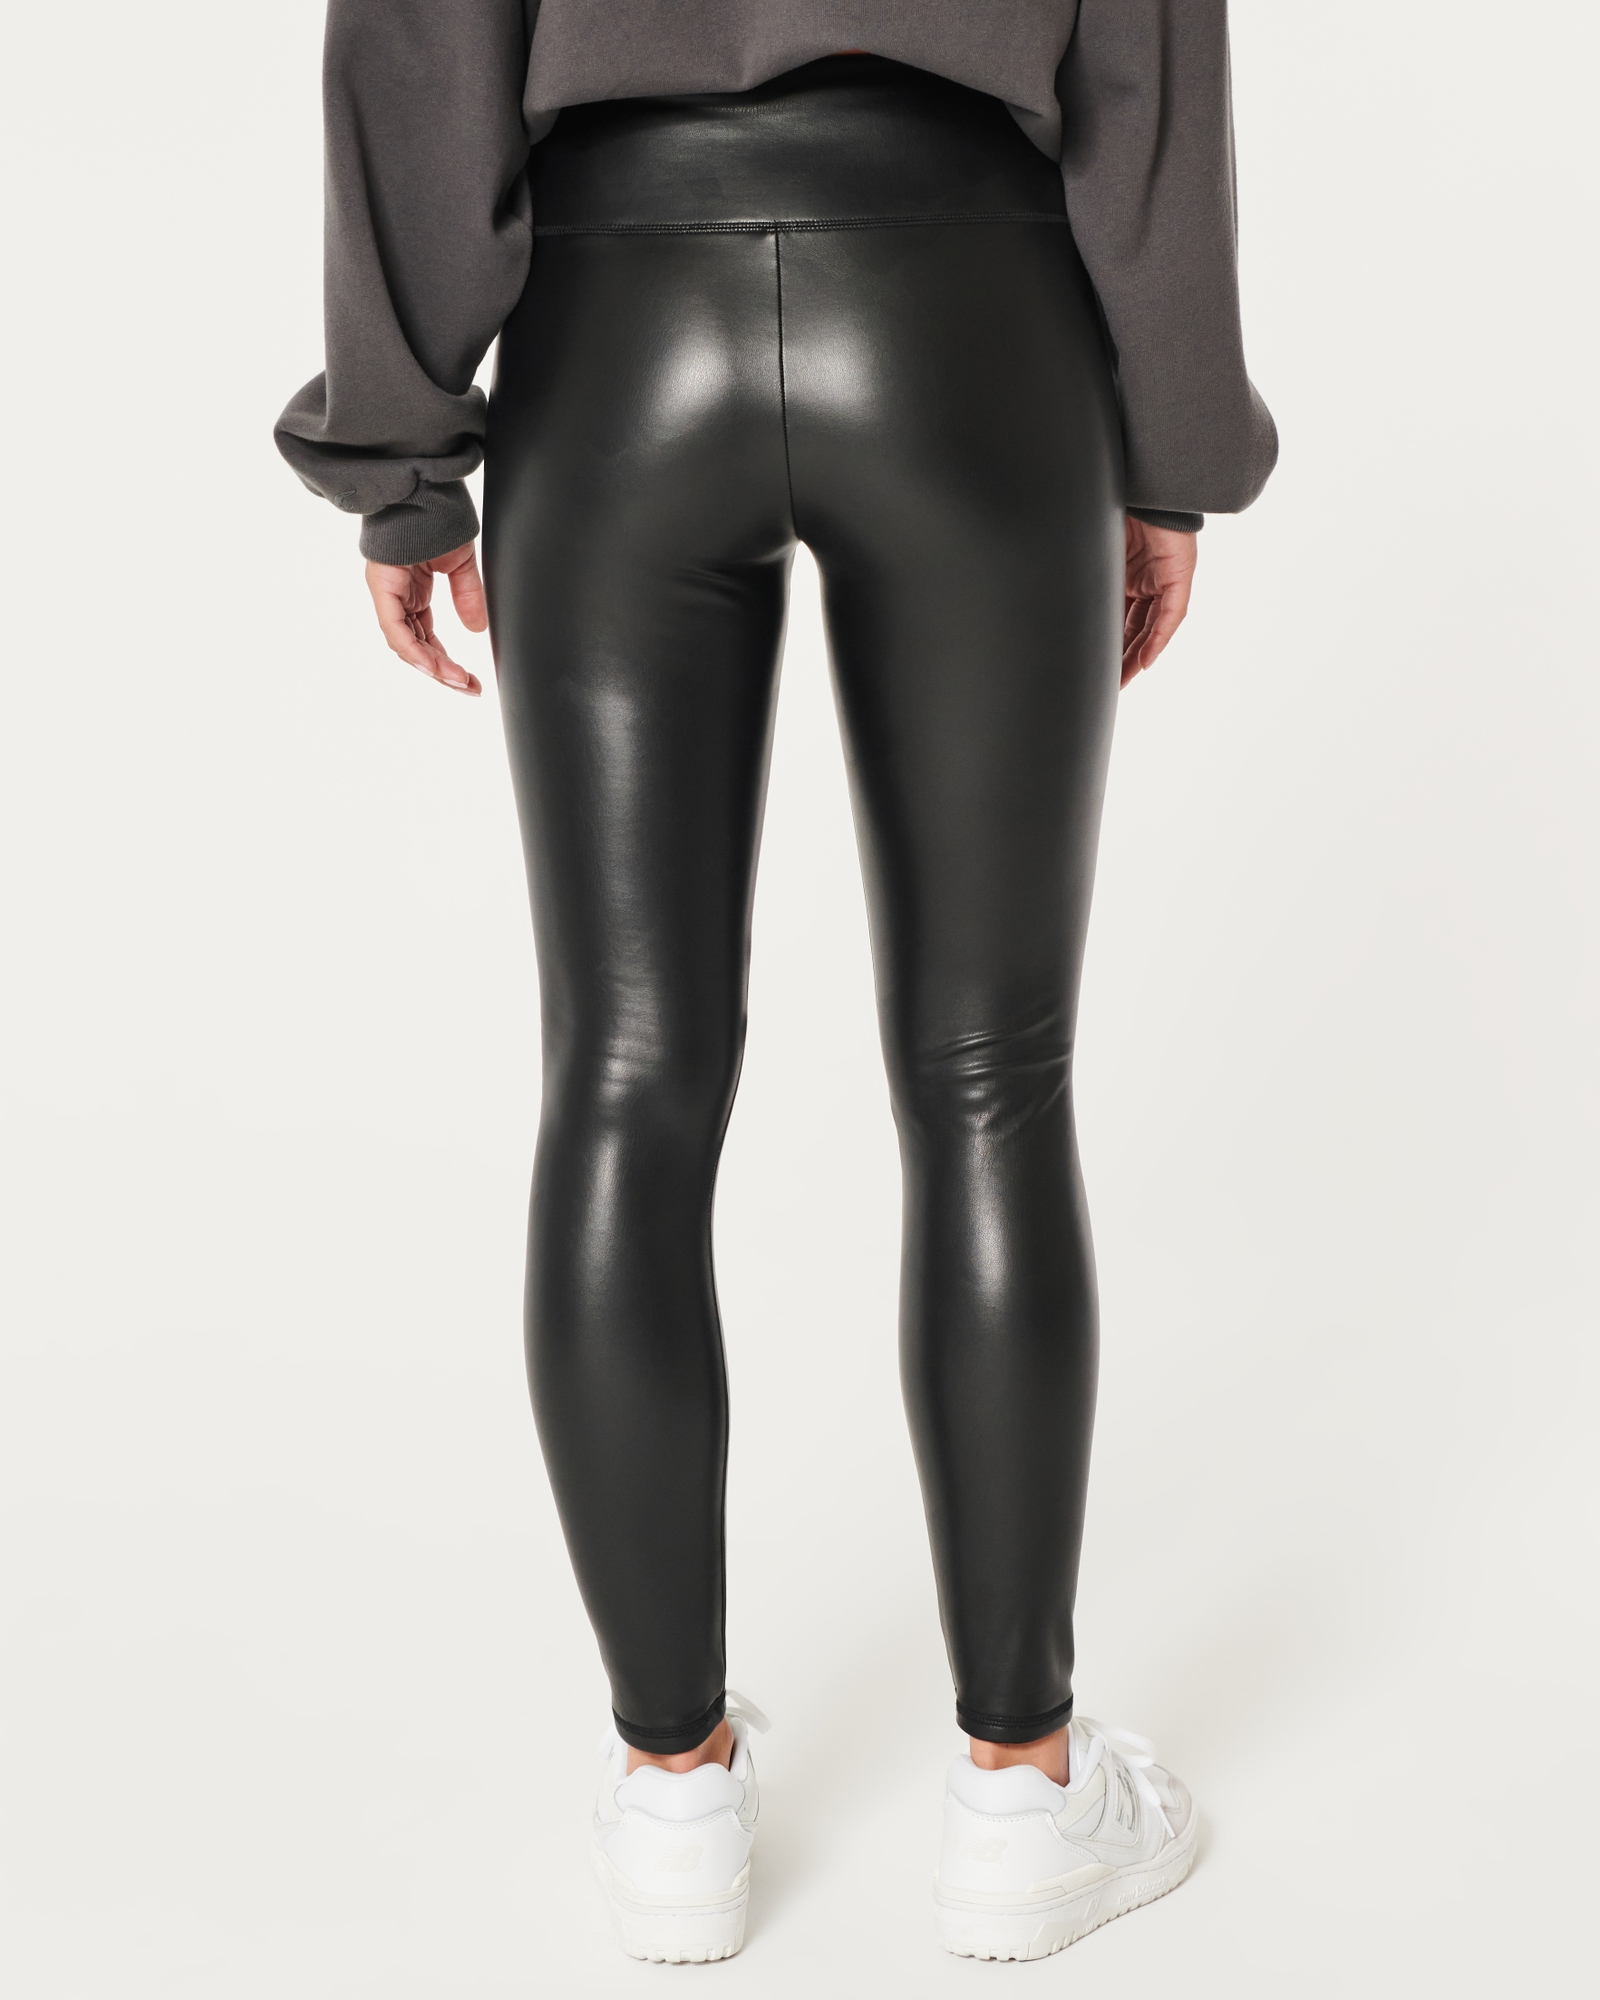 Plus Size Rise Faux Leather Leggings by B Free Intimate Apparel